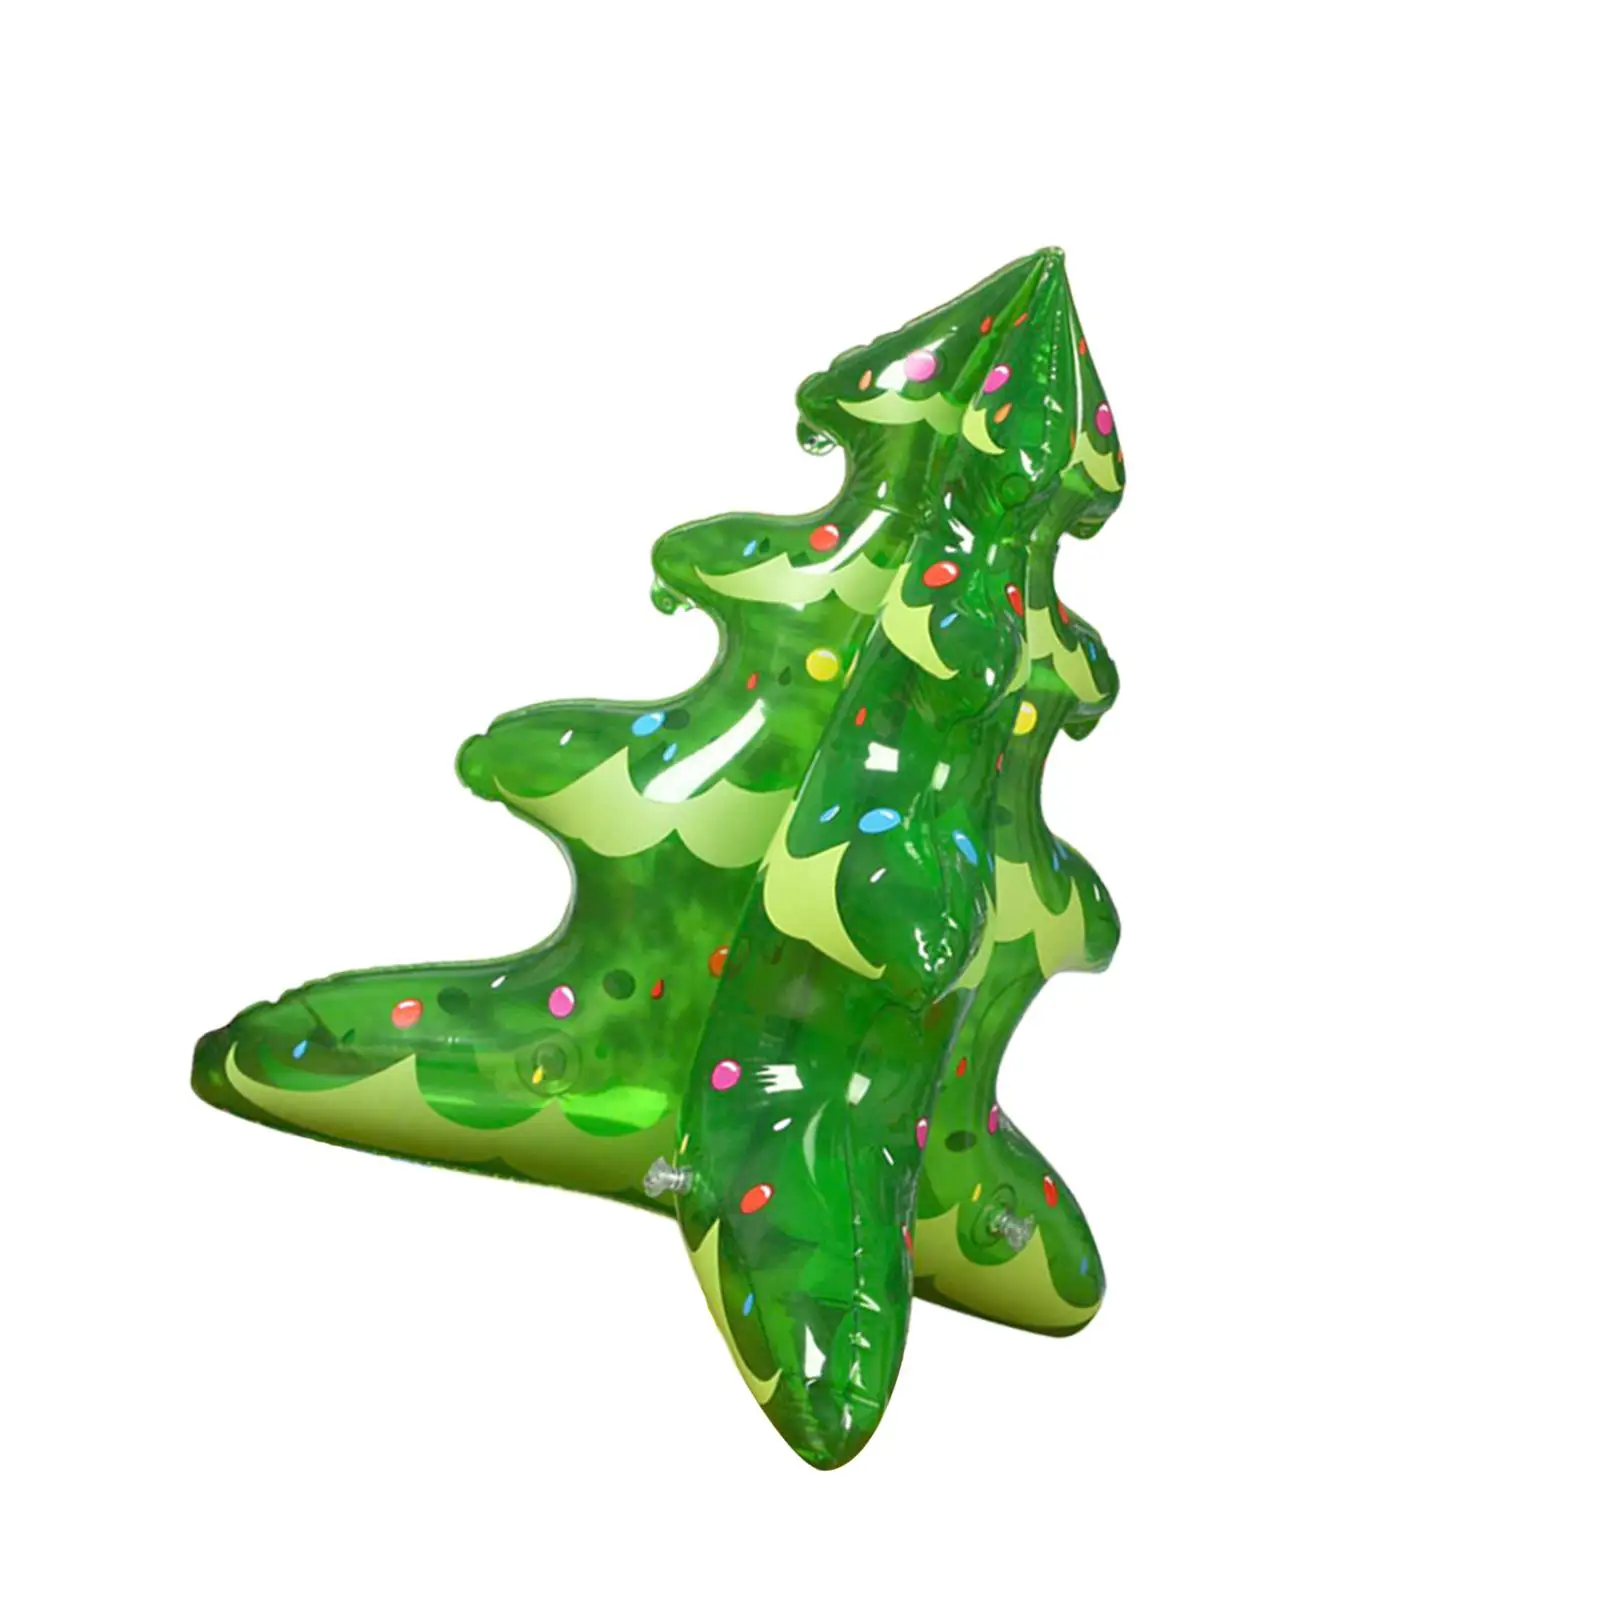 Inflatable Christmas Tree Holiday Decorations Christmas Tree Toy for Xmas Decoration Outdoor